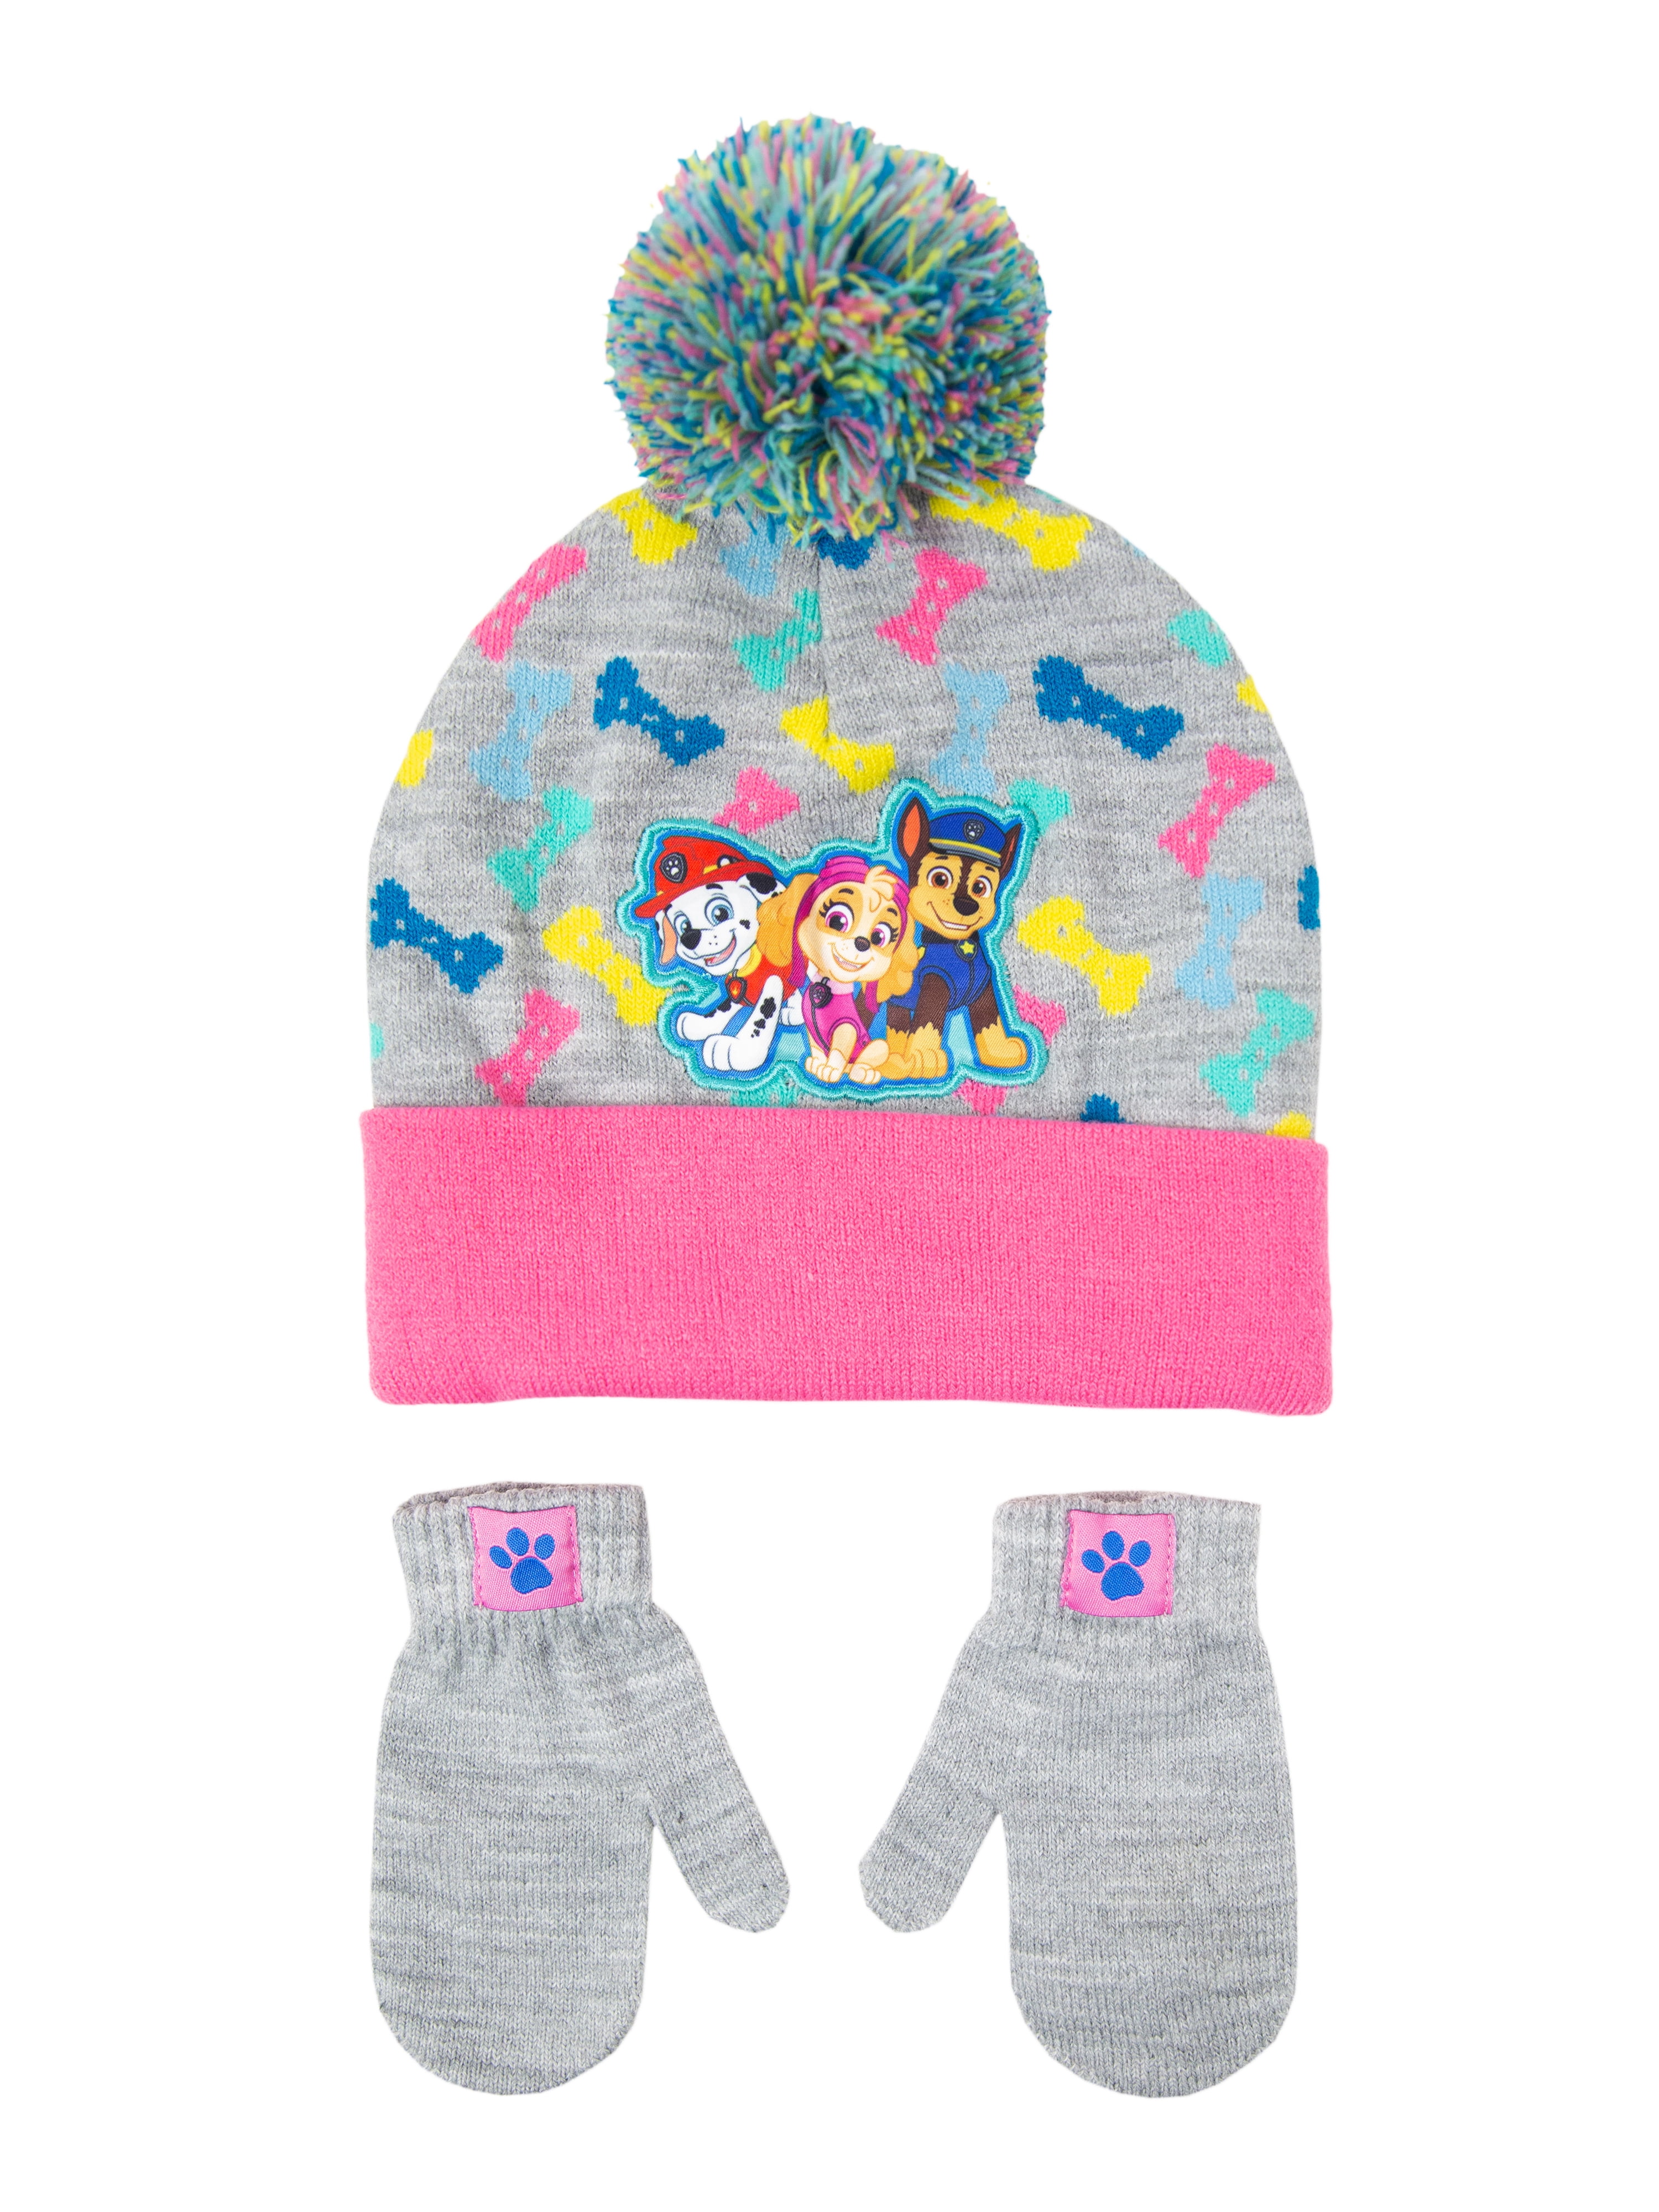 age 12-24 months New girls hat and mittens set 